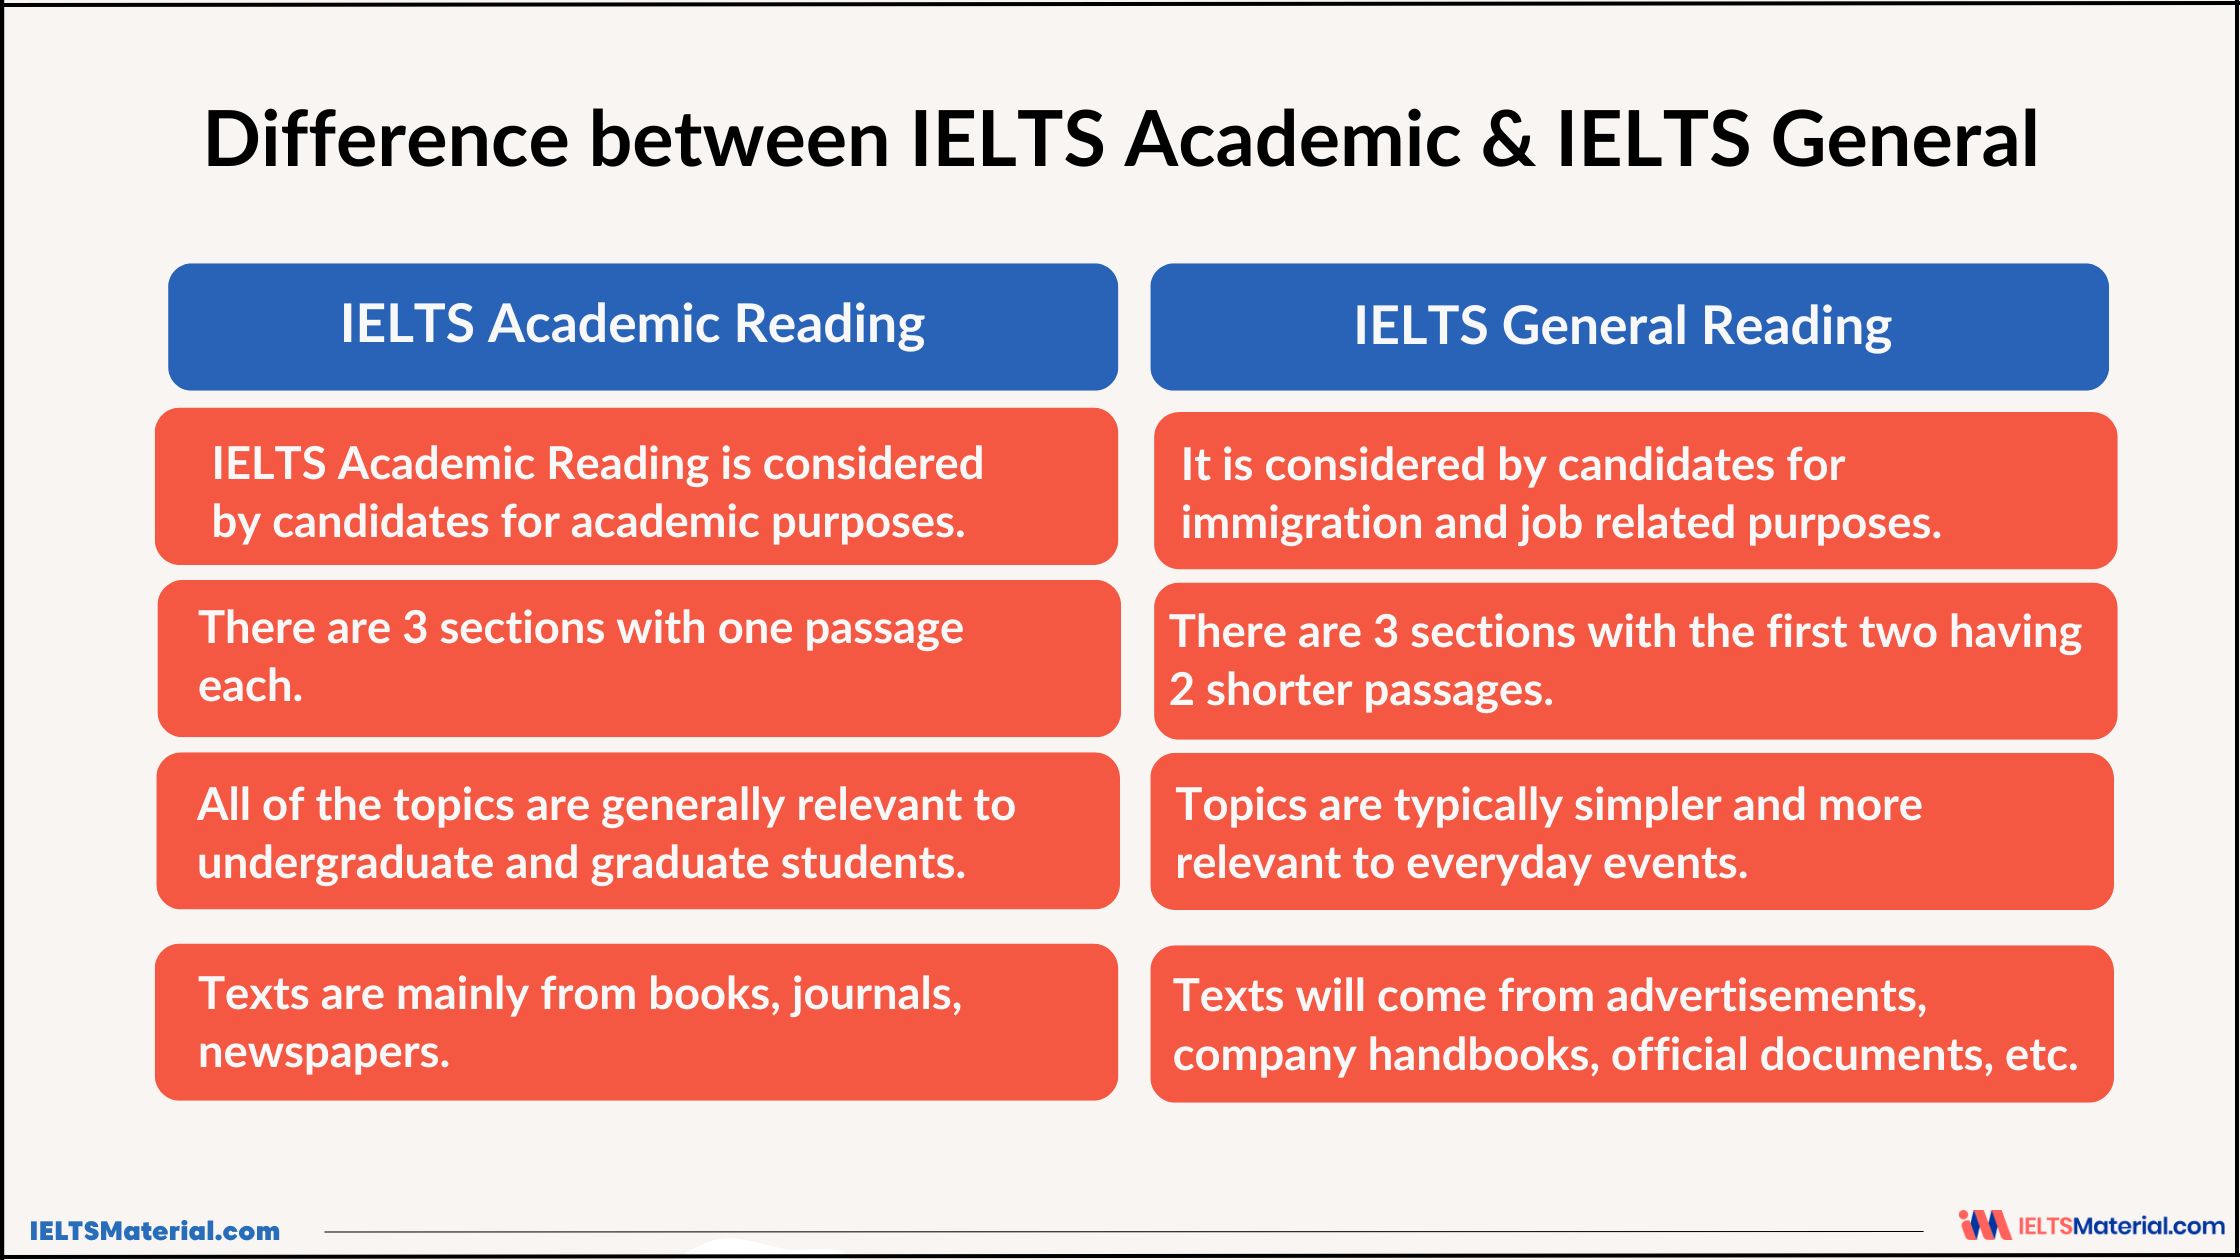 Difference between IELTS Academic & IELTS General